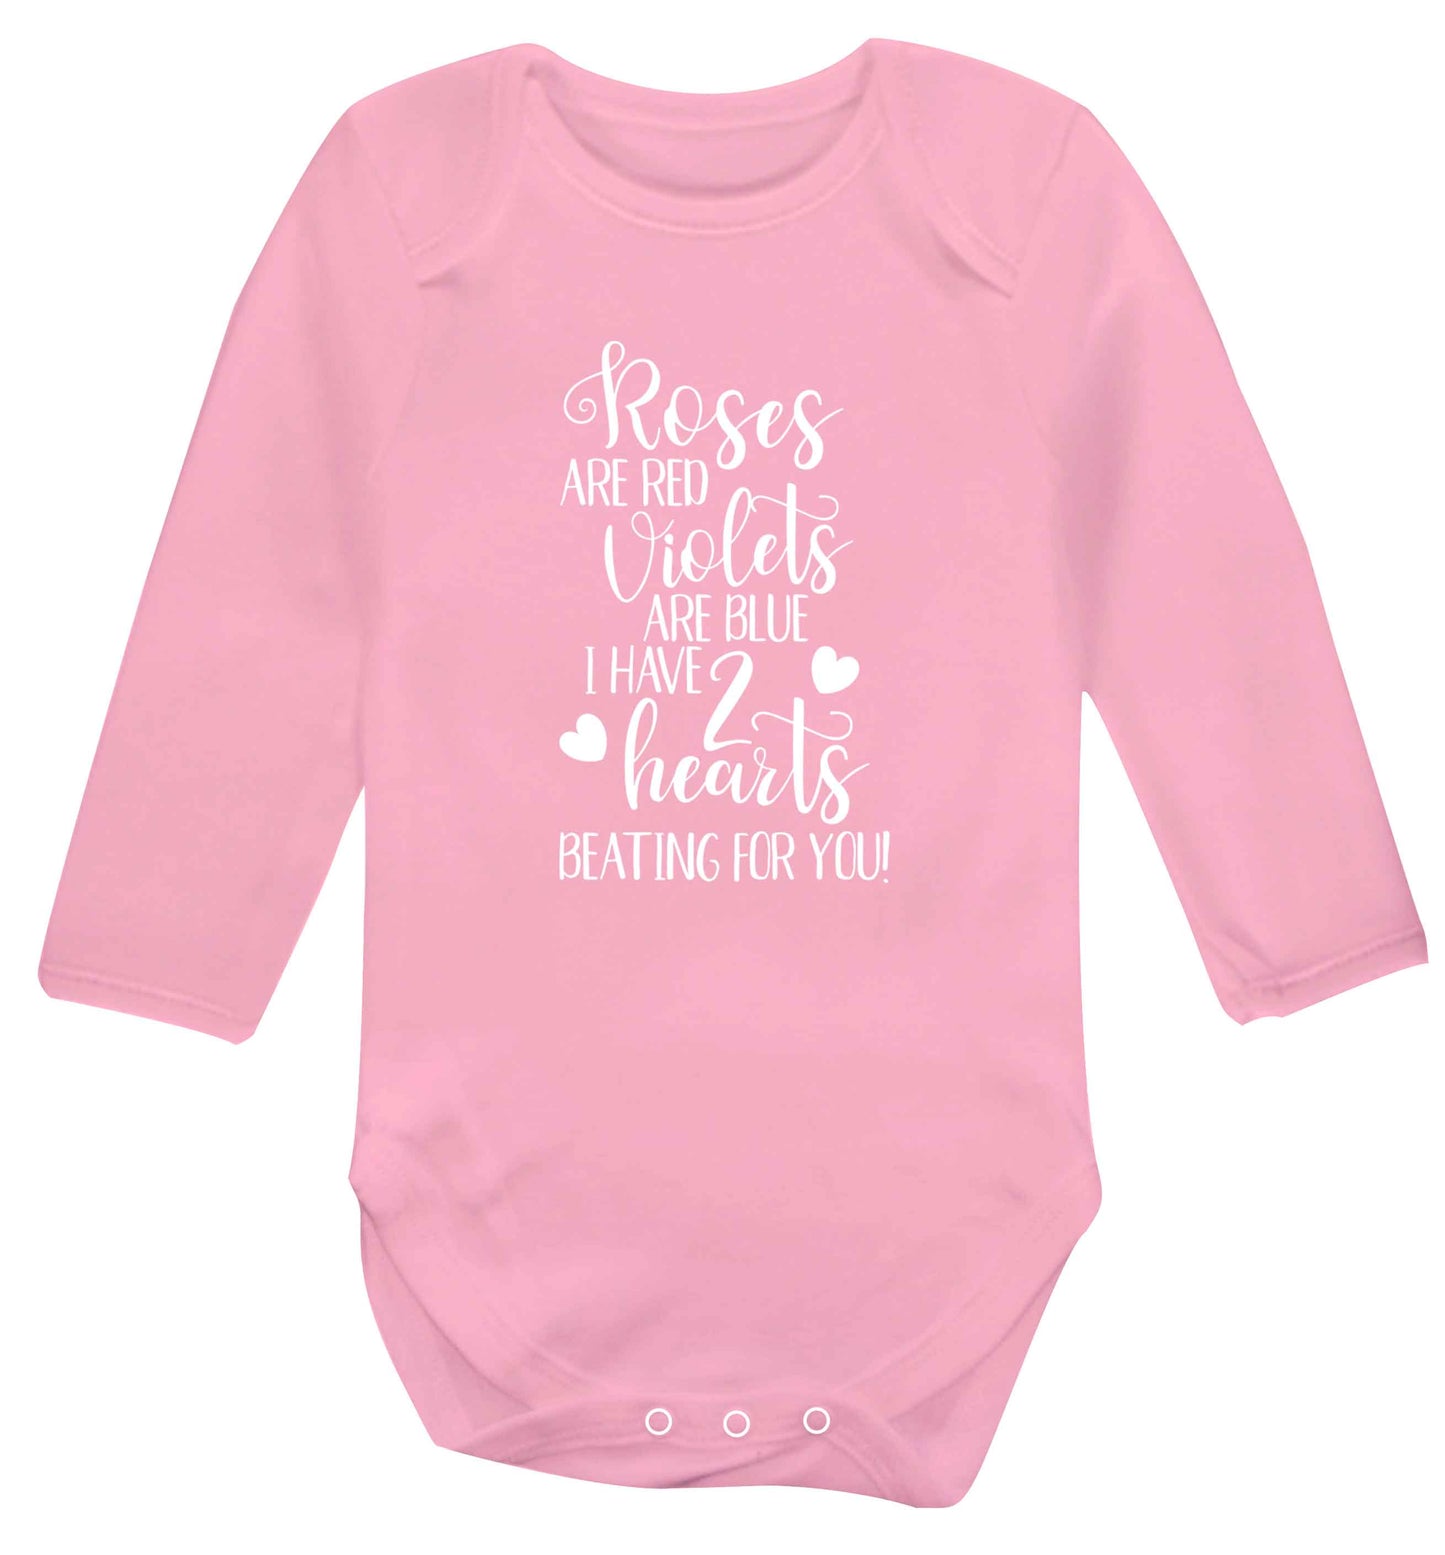 Roses are red violets are blue I have two hearts beating for you Baby Vest long sleeved pale pink 6-12 months